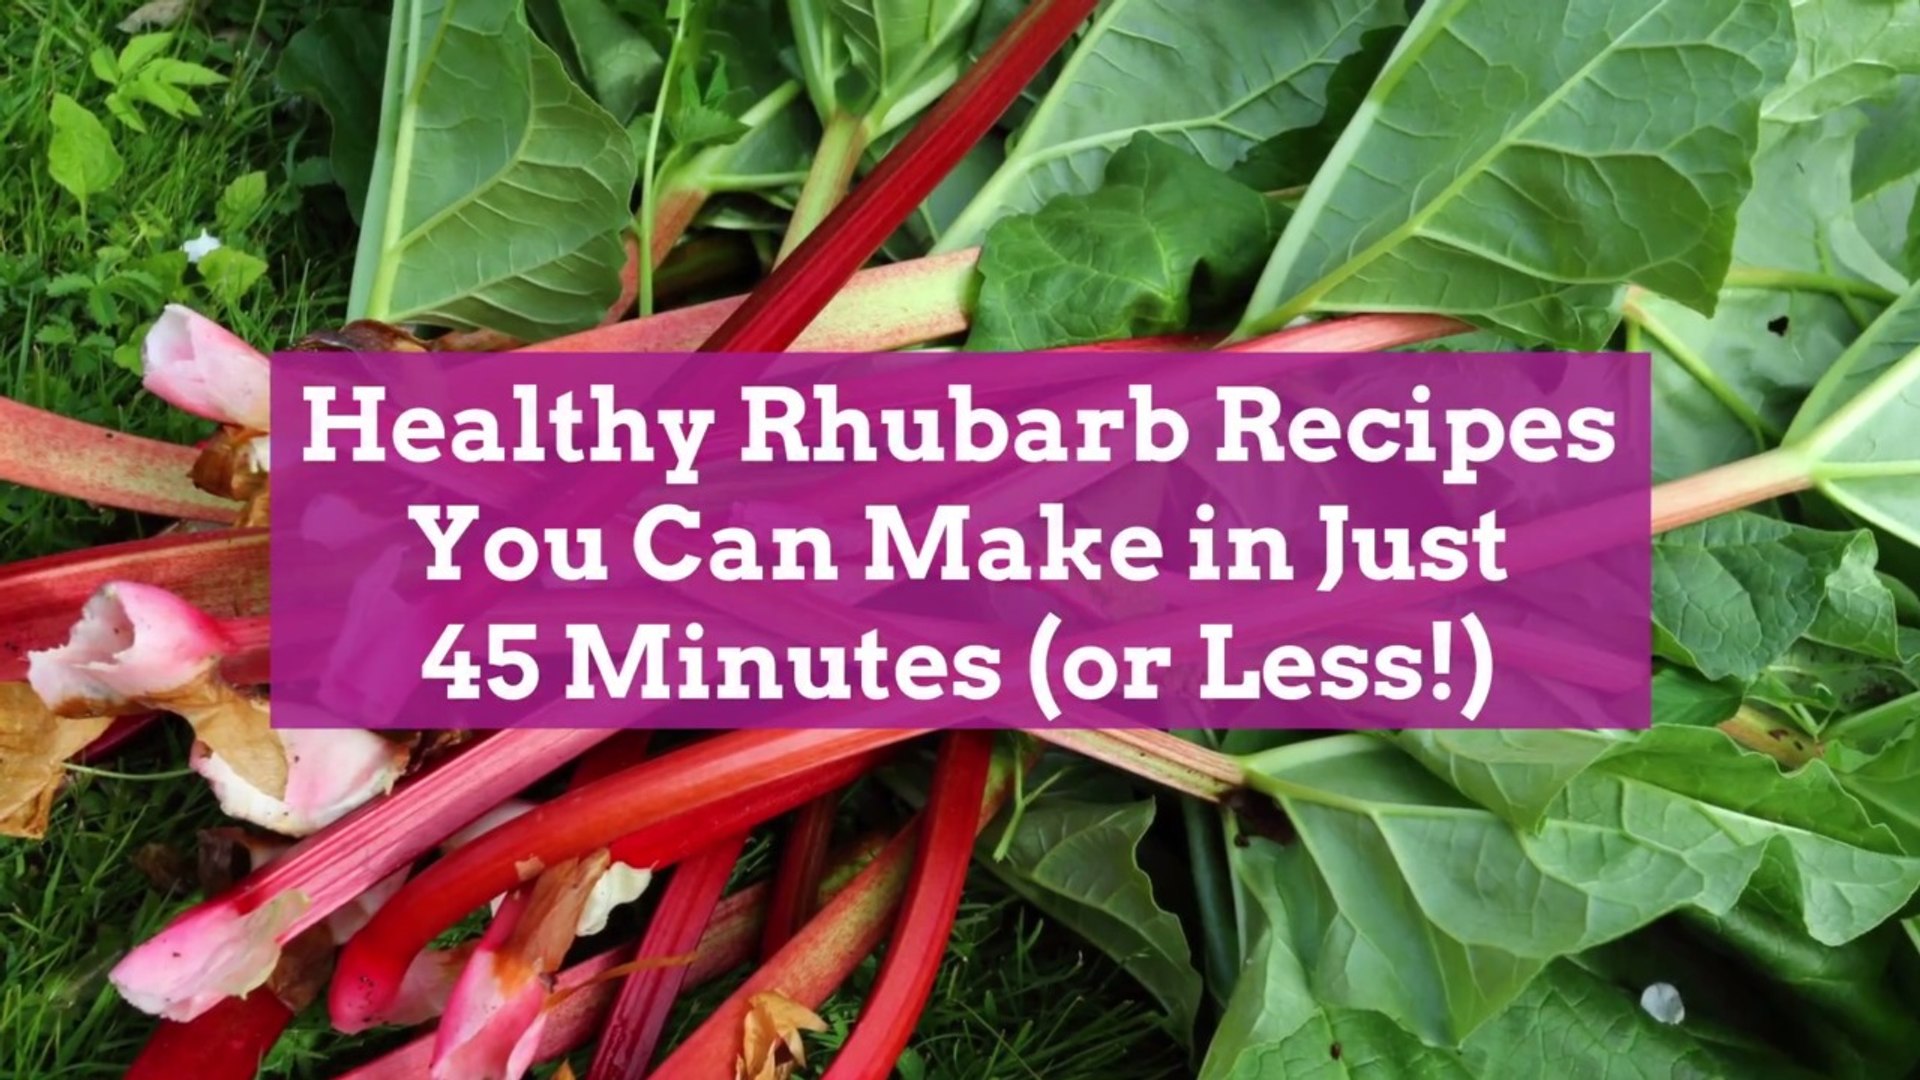 Healthy Rhubarb Recipes You Can Make in Just 10 Minutes or Less